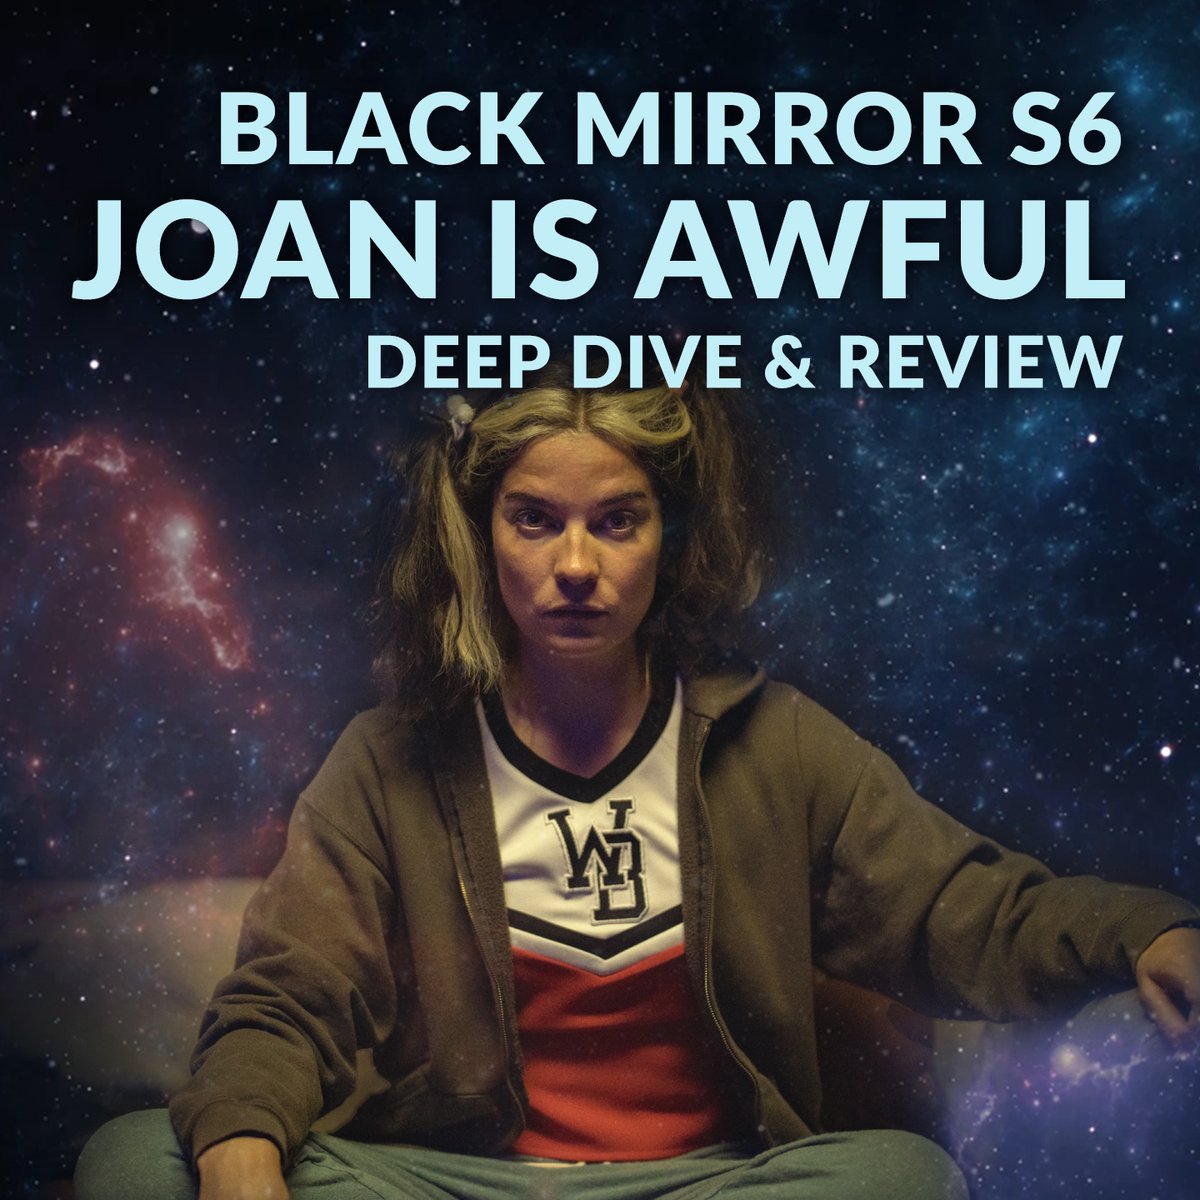 Black Mirror S6 - Joan is Awful 
Deep Dive & Review is out!

This is a short/sweet episode... enjoy!

👉Apple tyandthatguy.com/a122
👉Spotify tyandthatguy.com/a122

SUBSCRIBE TO THE #PODCAST
LEAVE A REVIEW   
linktr.ee/tyandthatguy #tyandthatguy #BlackMirror #blackmirrors6